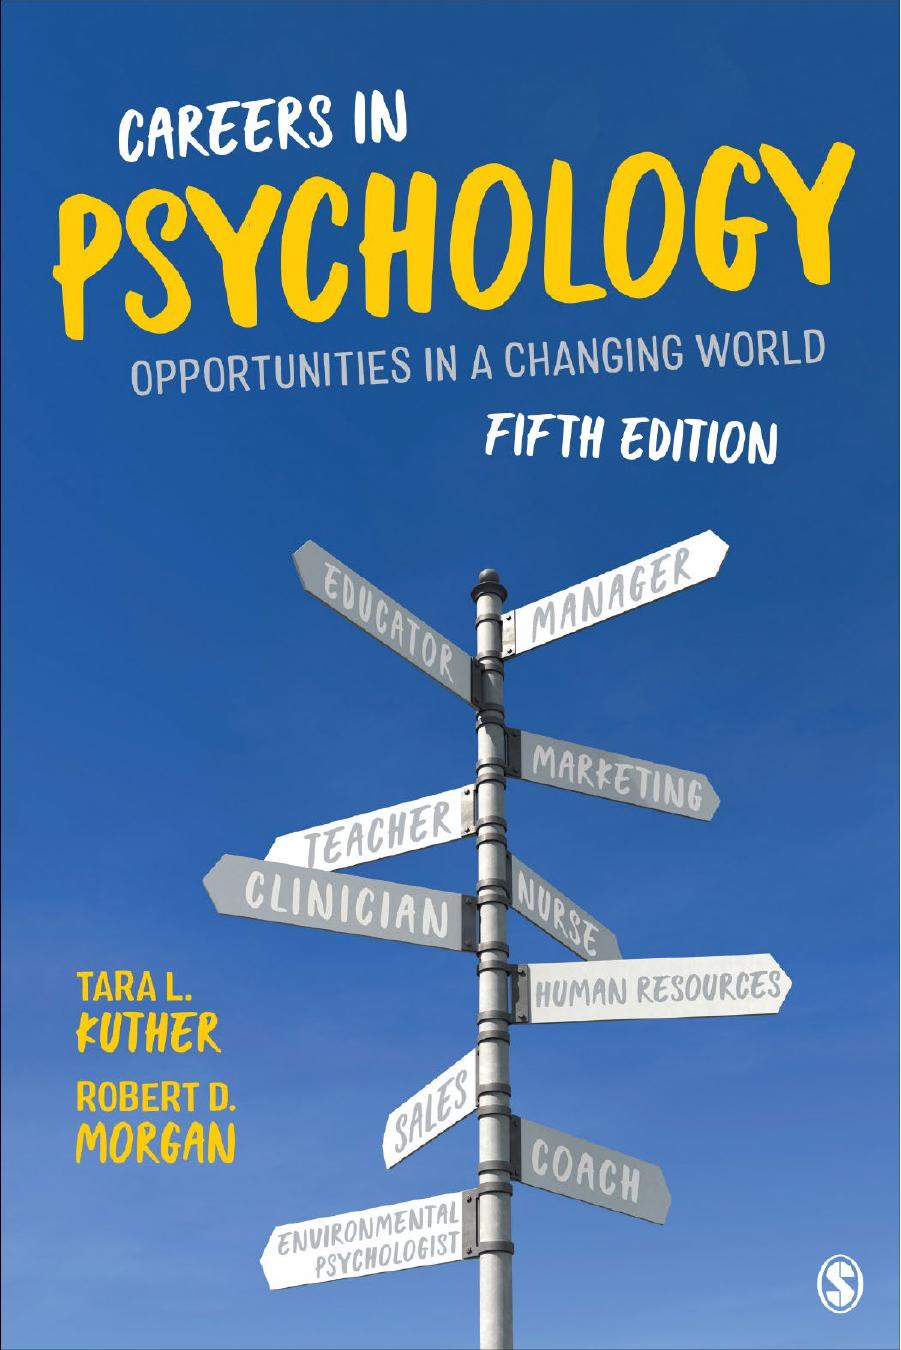 Careers in Psychology - Opportunities in a changing world by Tara L. Kuther Robert D. Morgan